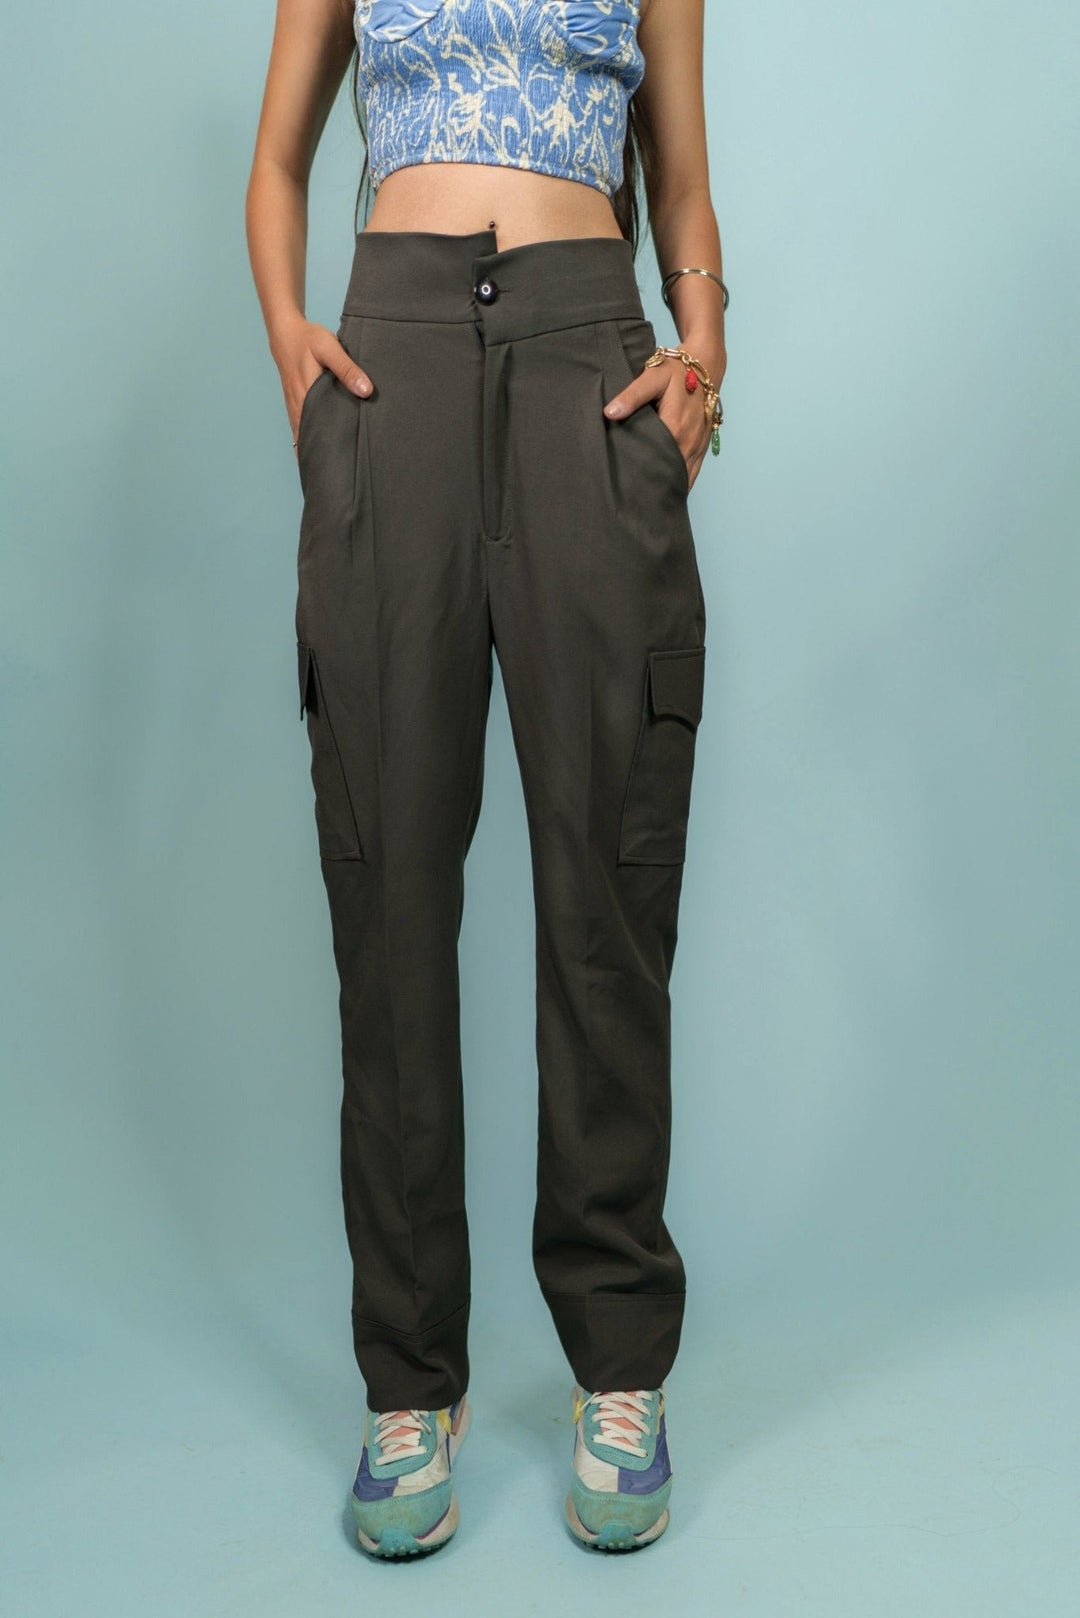 Relaxed Fit Cargo Pants Nolabels.in